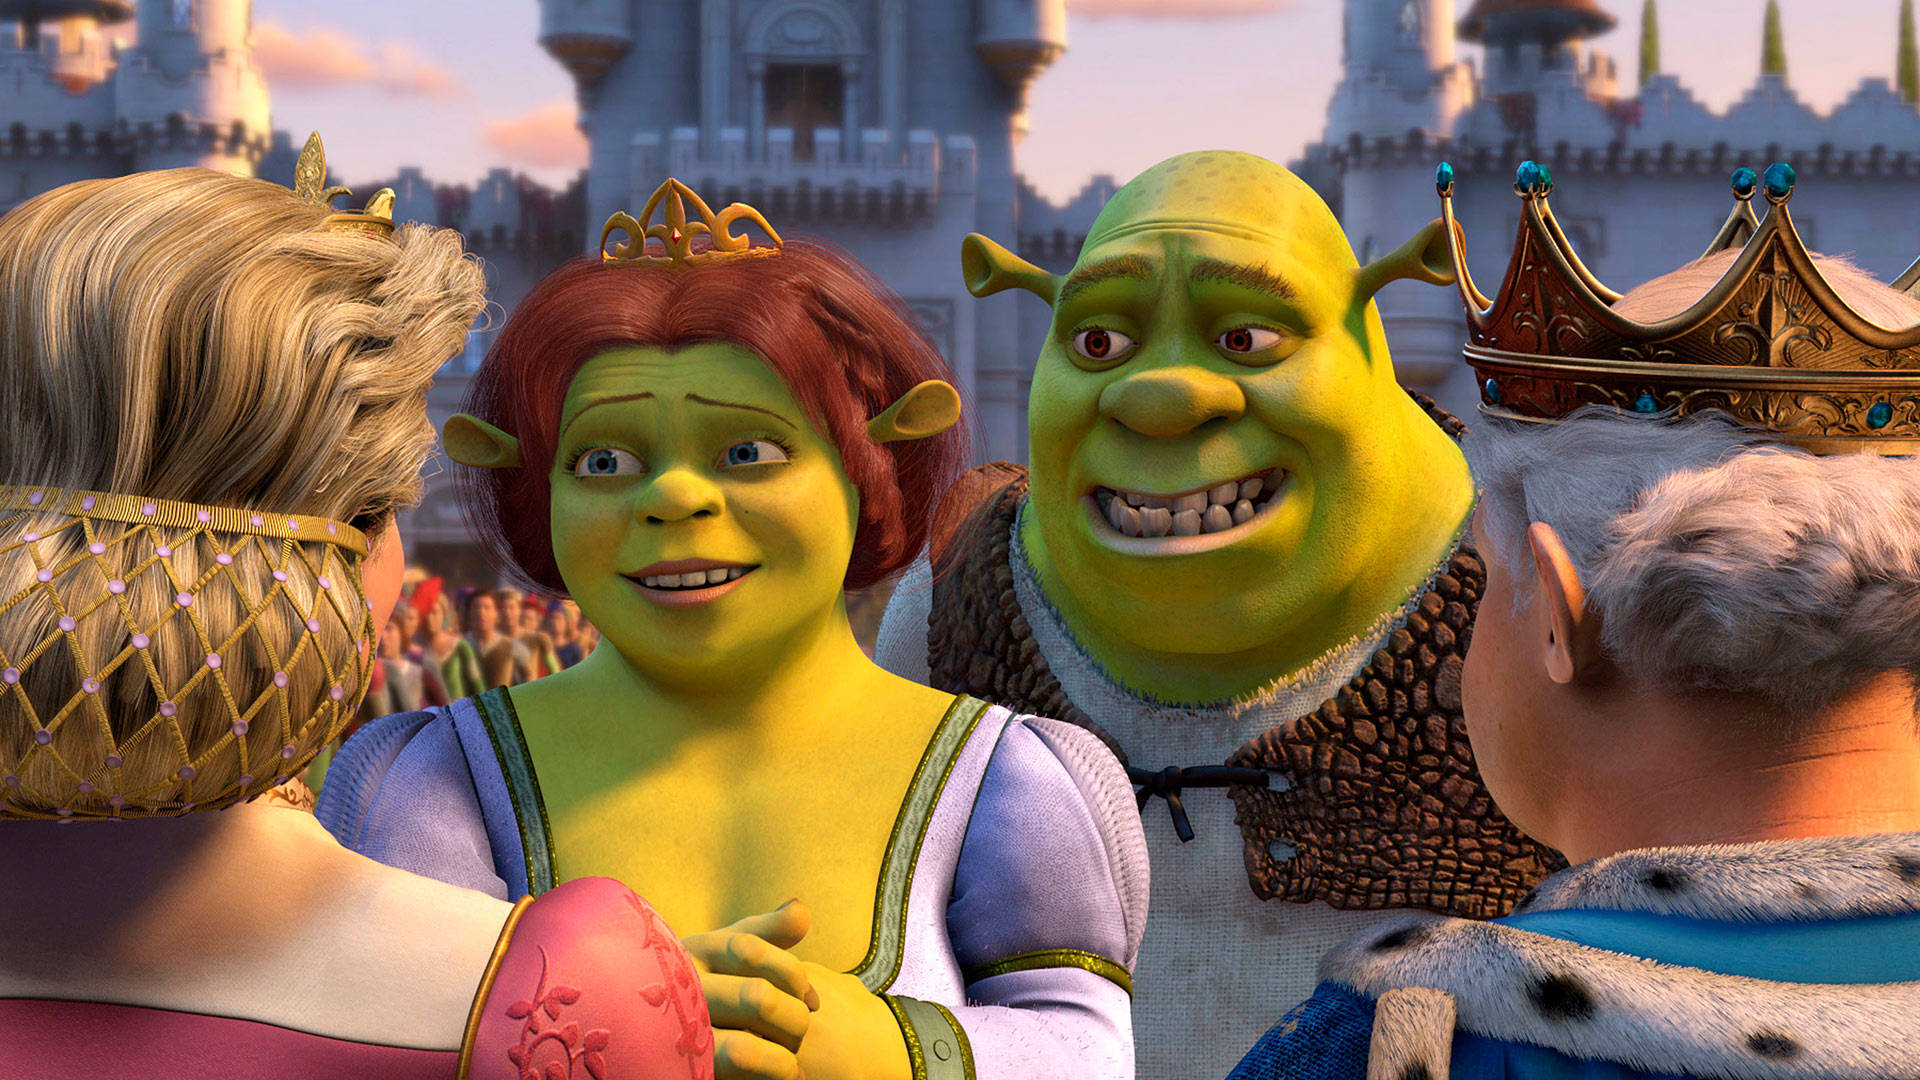 Fiona And Shrek 2 In Palace Wallpaper